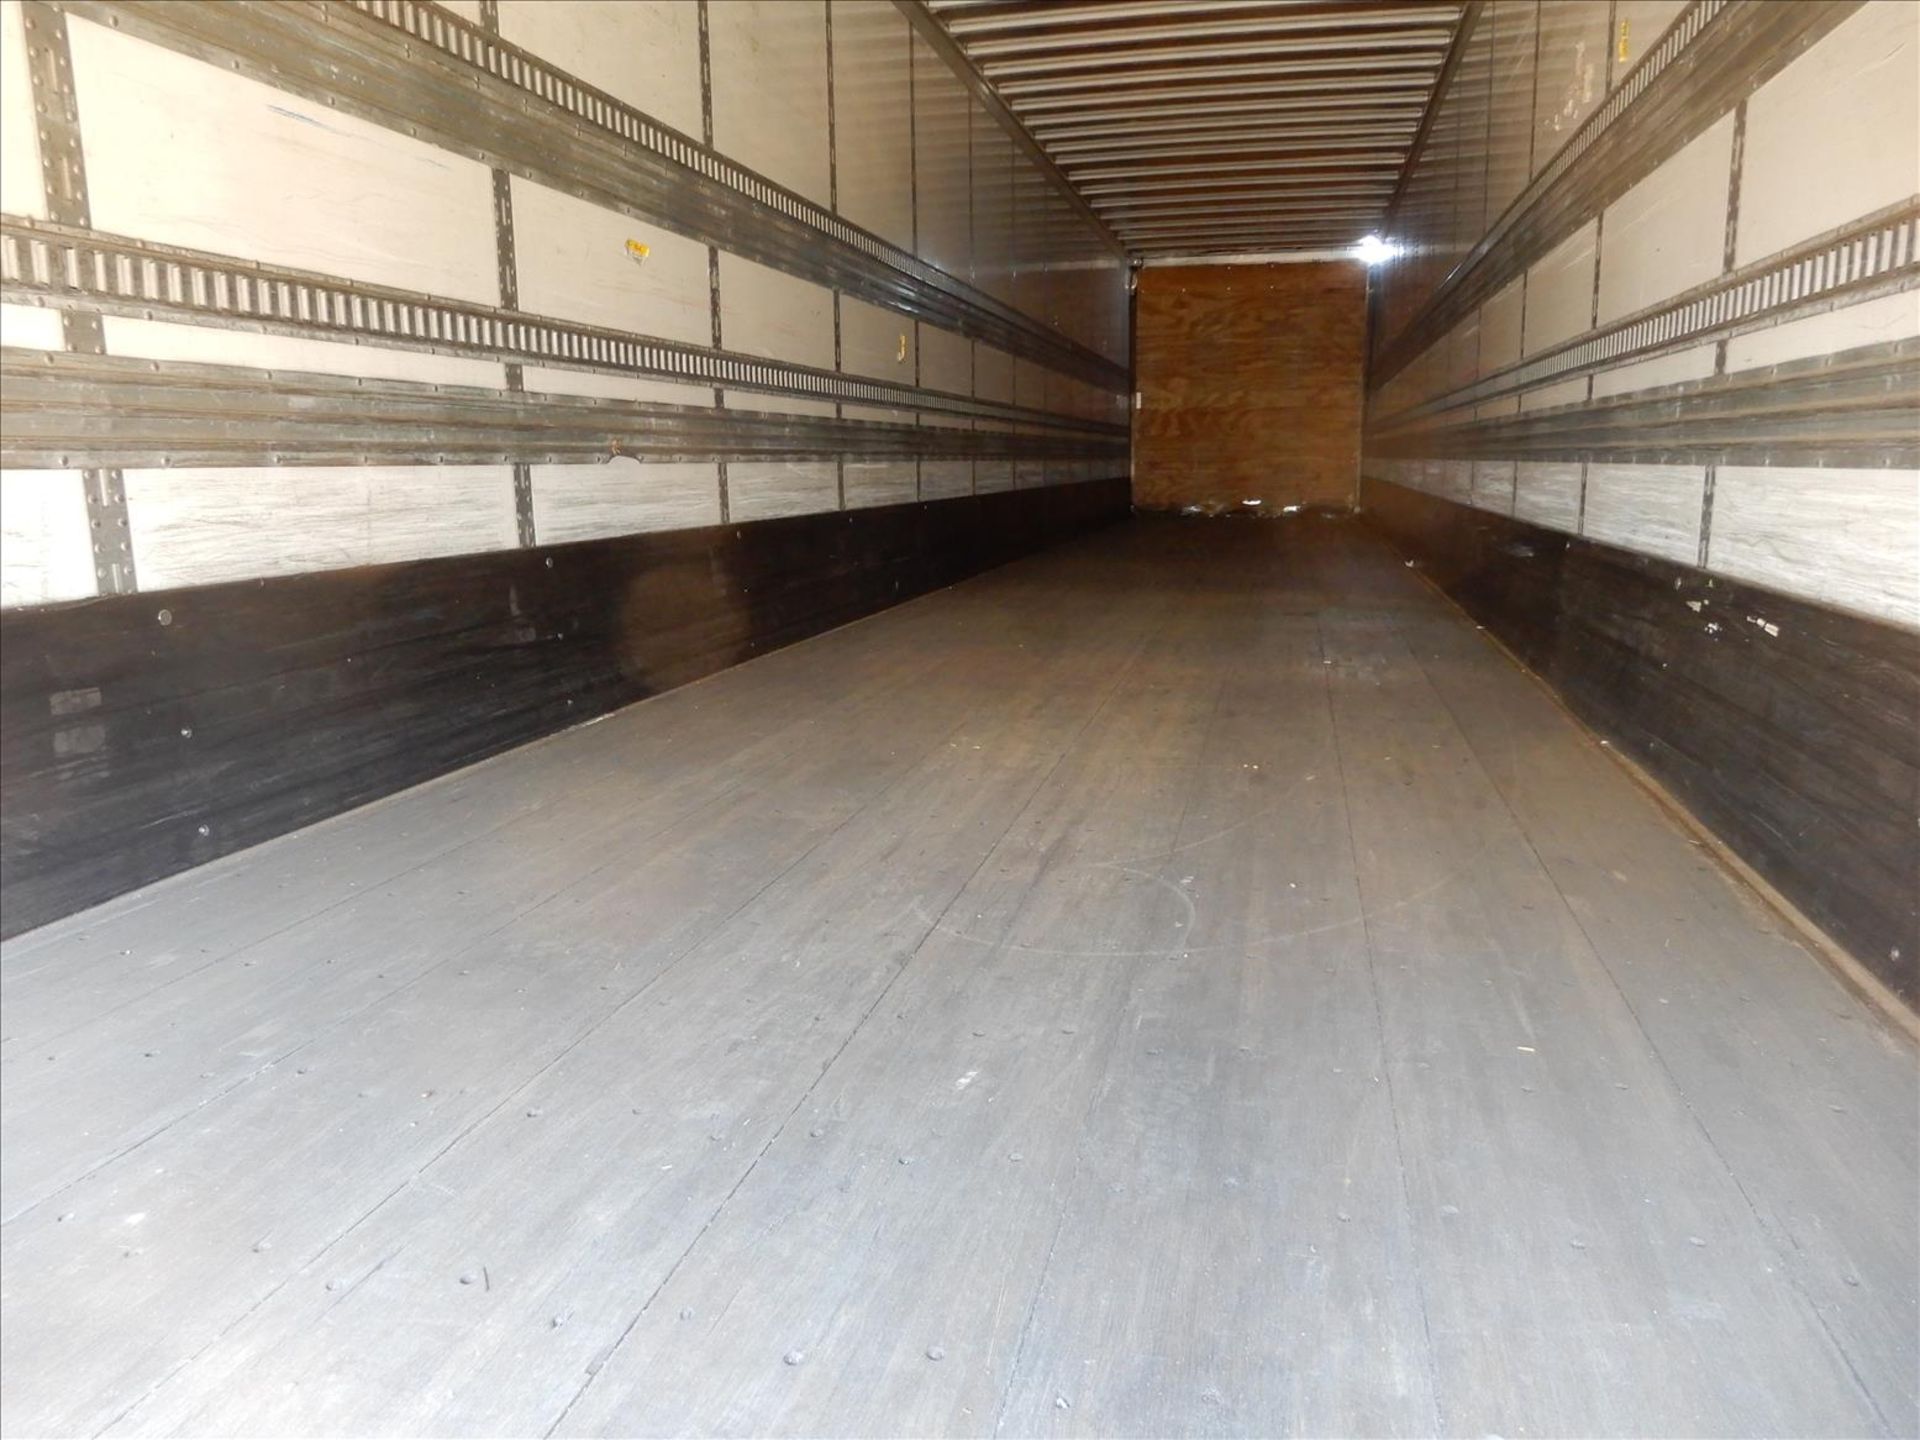 2012 Stoughton Trailer - Located in Indianapolis, IN - Image 25 of 30